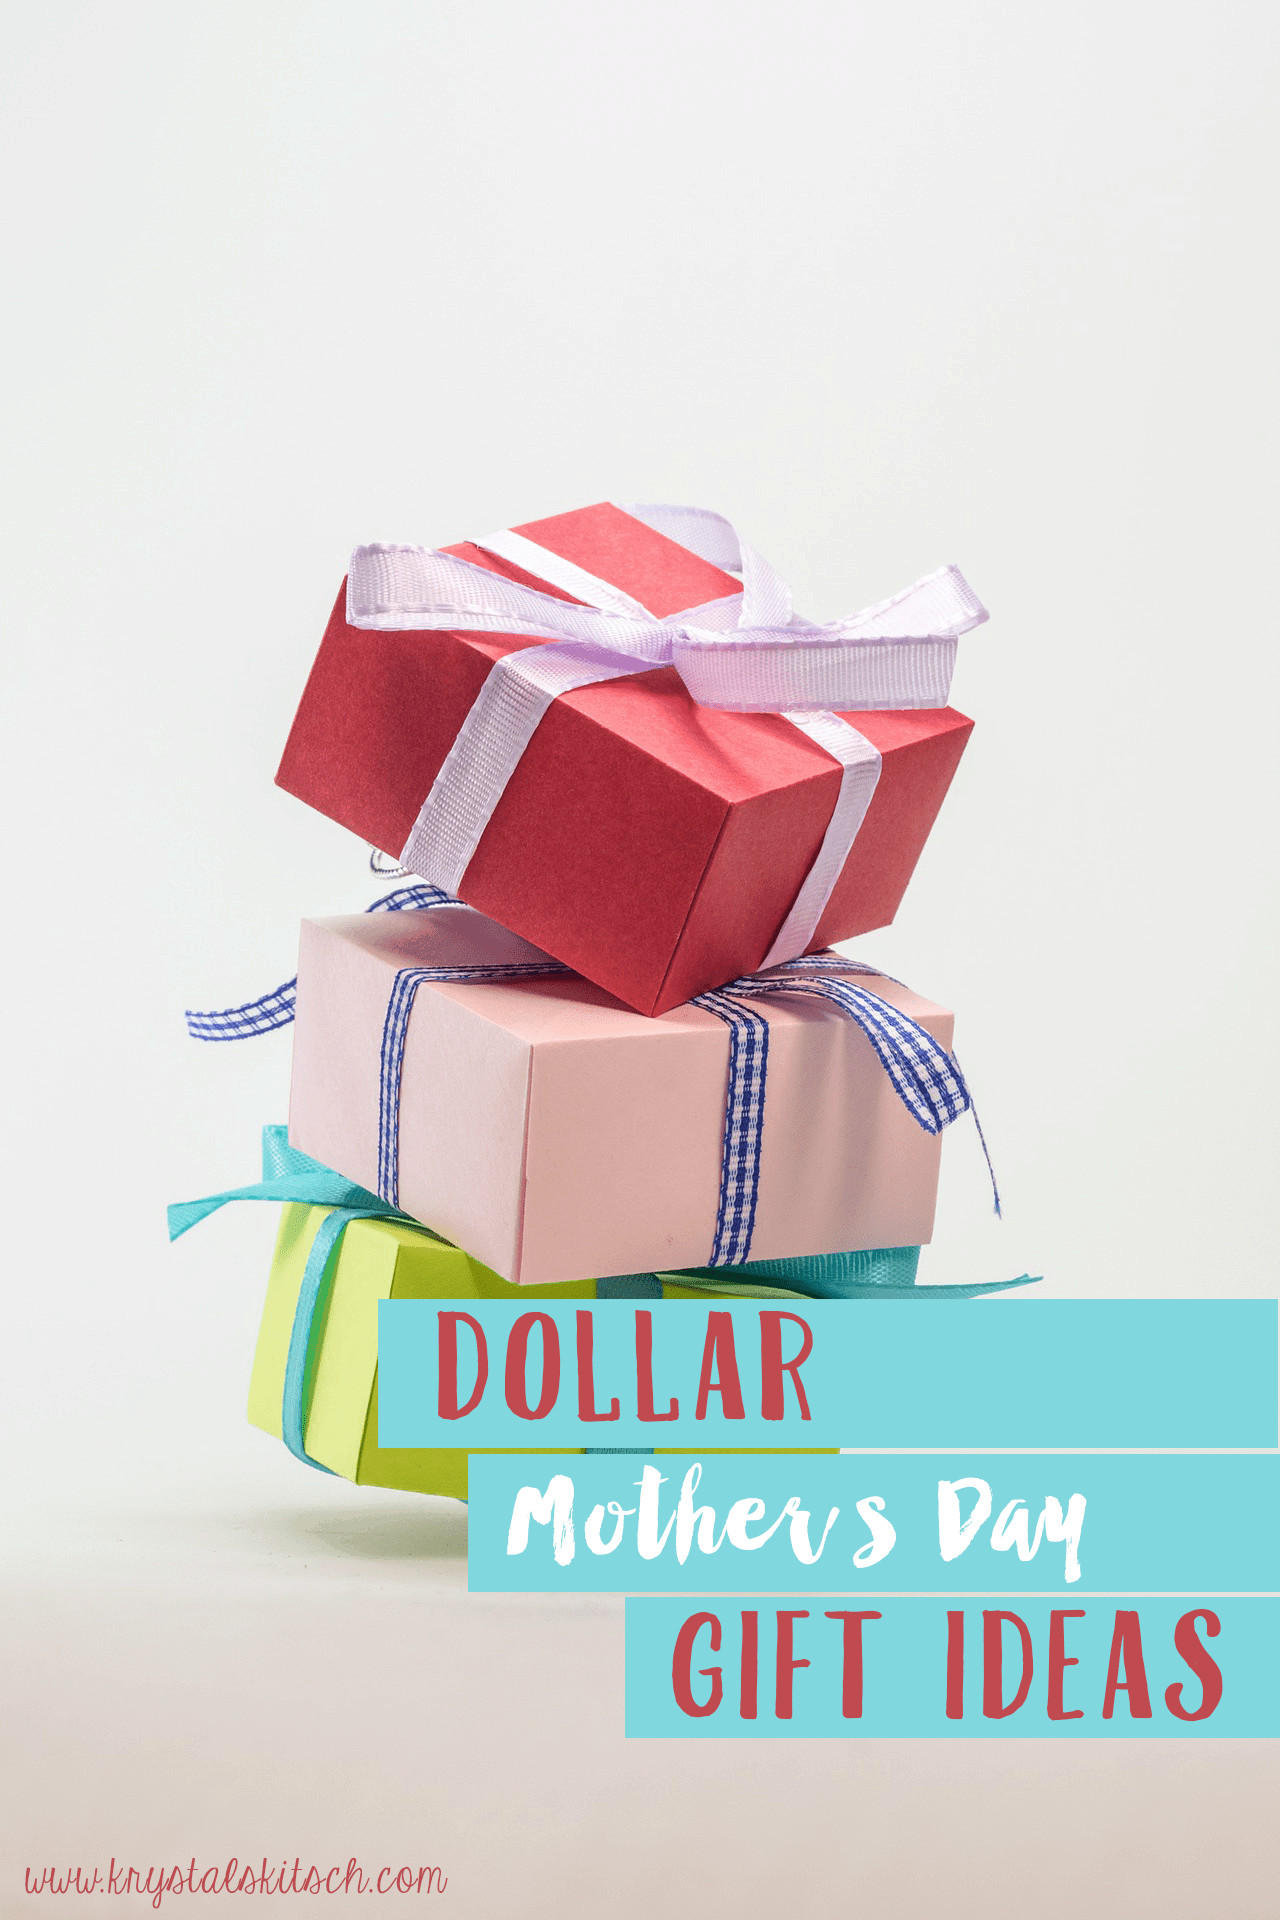 Mother's Day Letter Ideas
 Mother s Day Gift Ideas For $1 Sunny Sweet Days